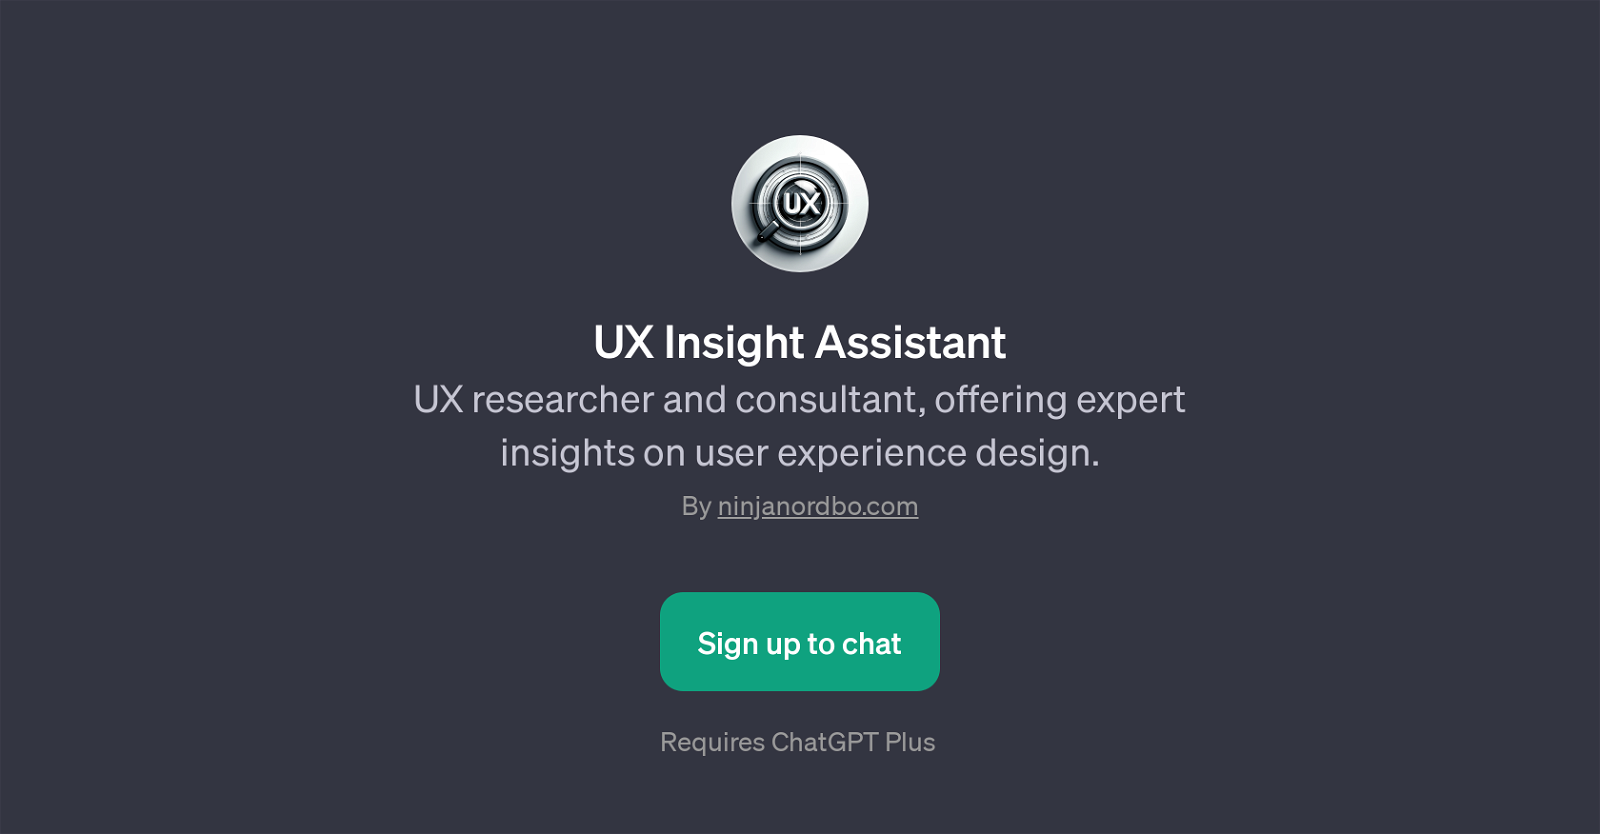 UX Insight Assistant website